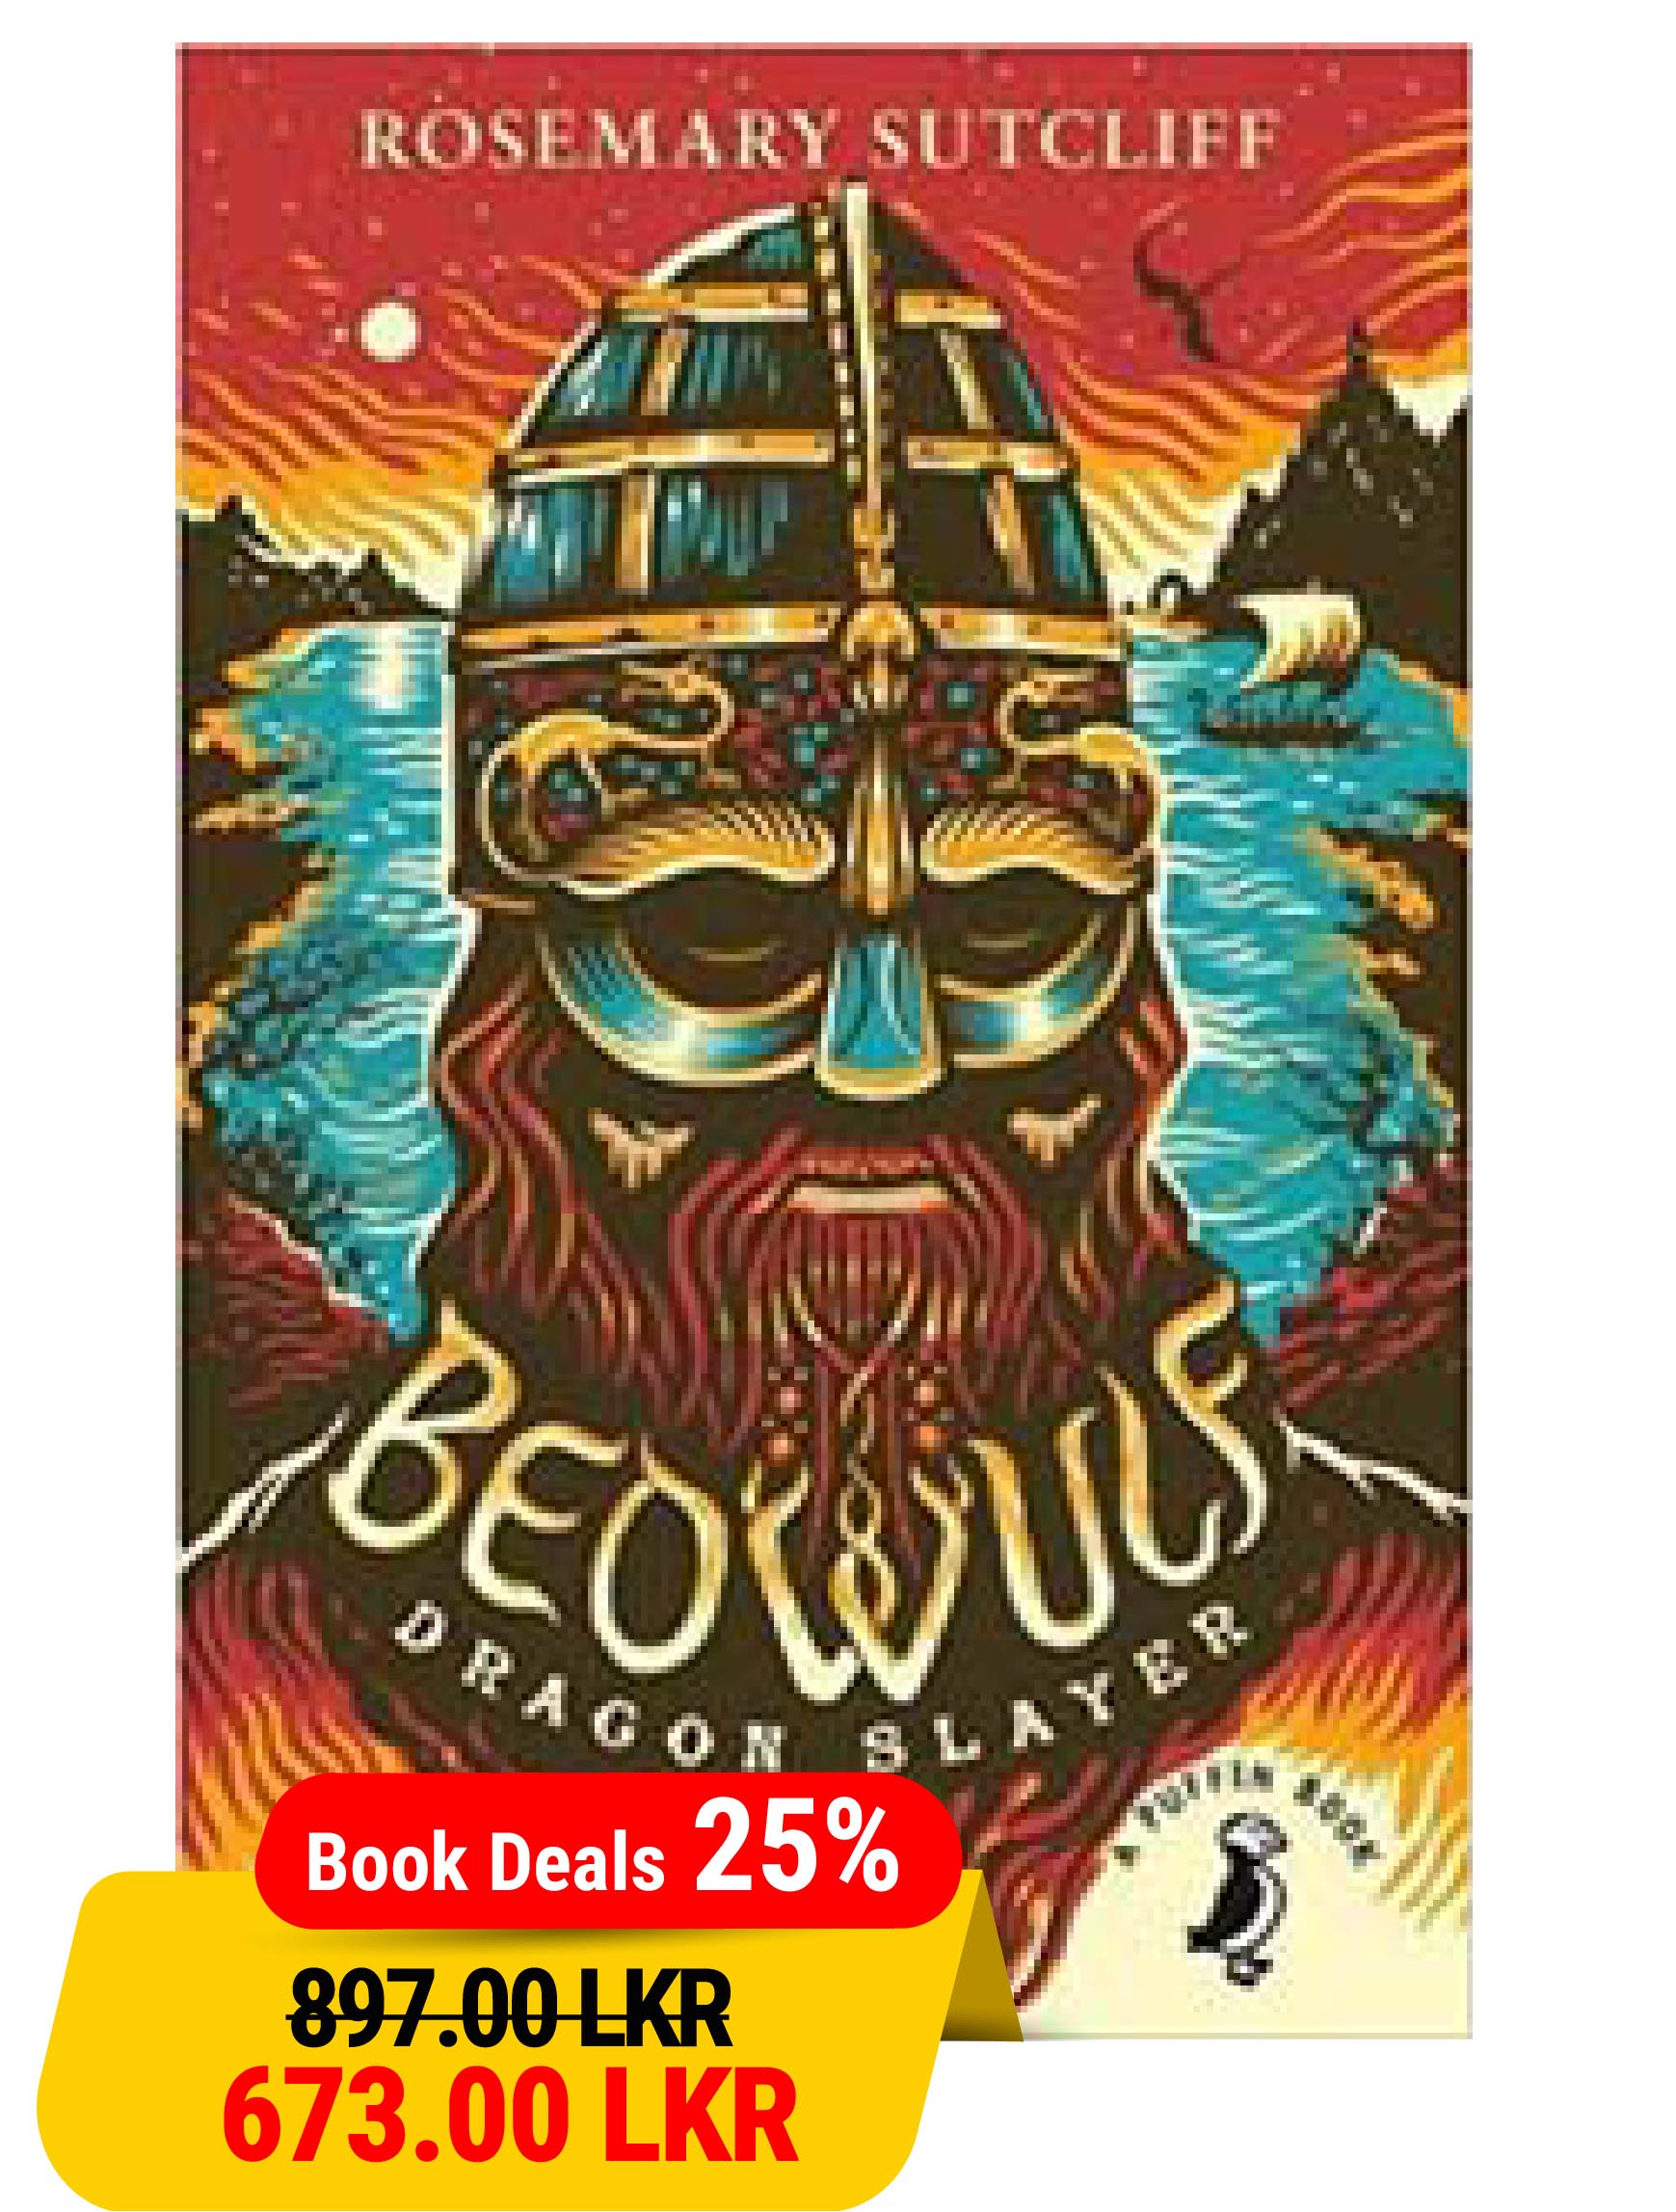 Beowulf, Dragon Slayer (A Puffin Book)